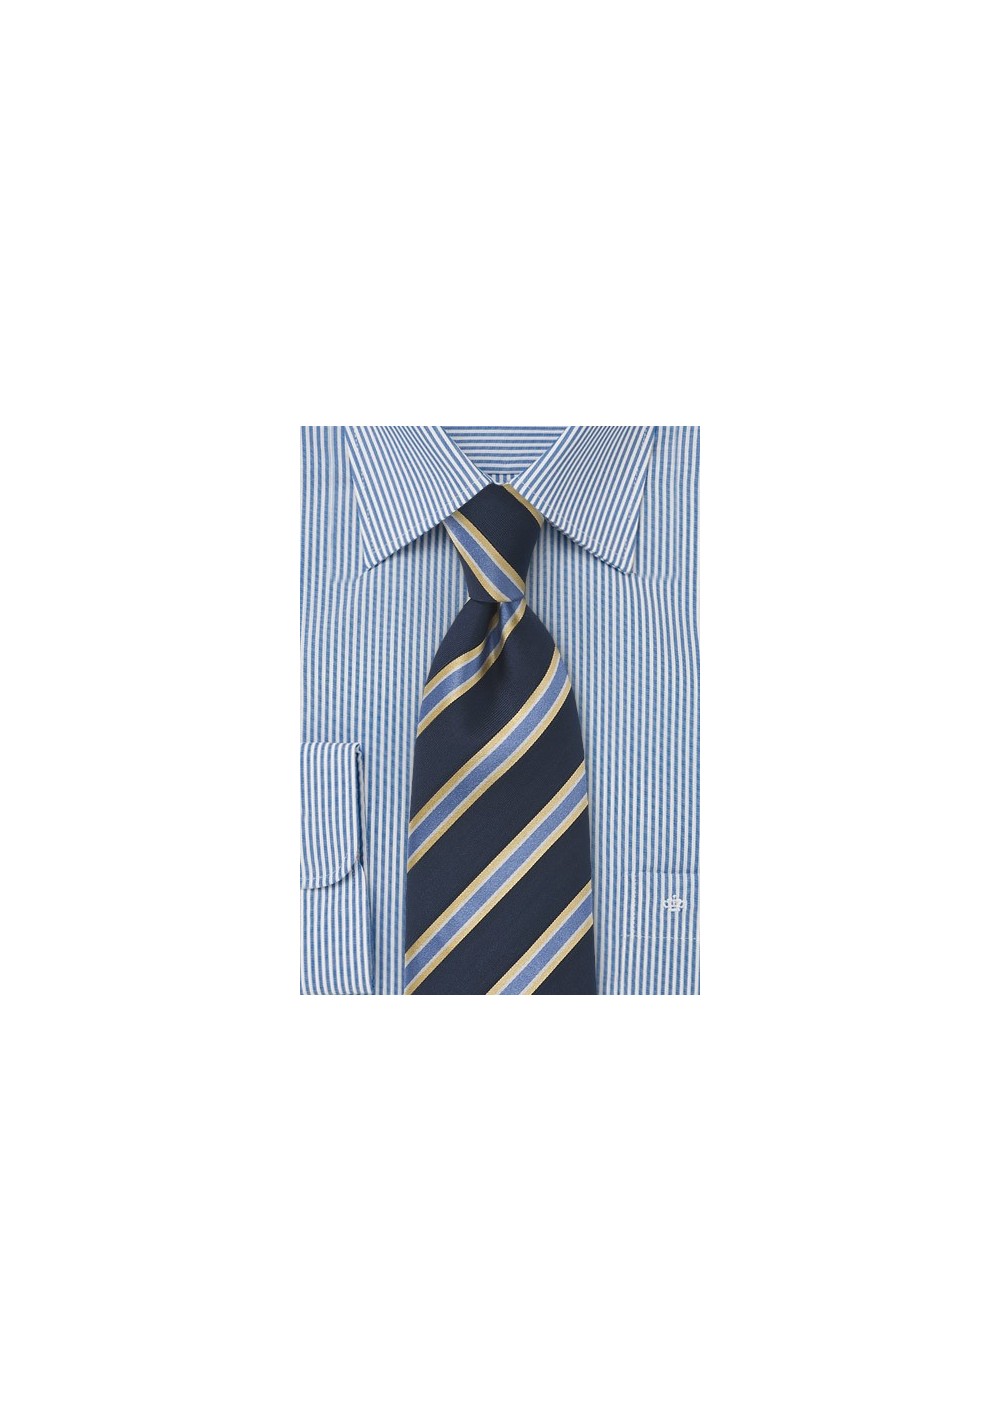 Classic Striped Tie in Navy and Yellow